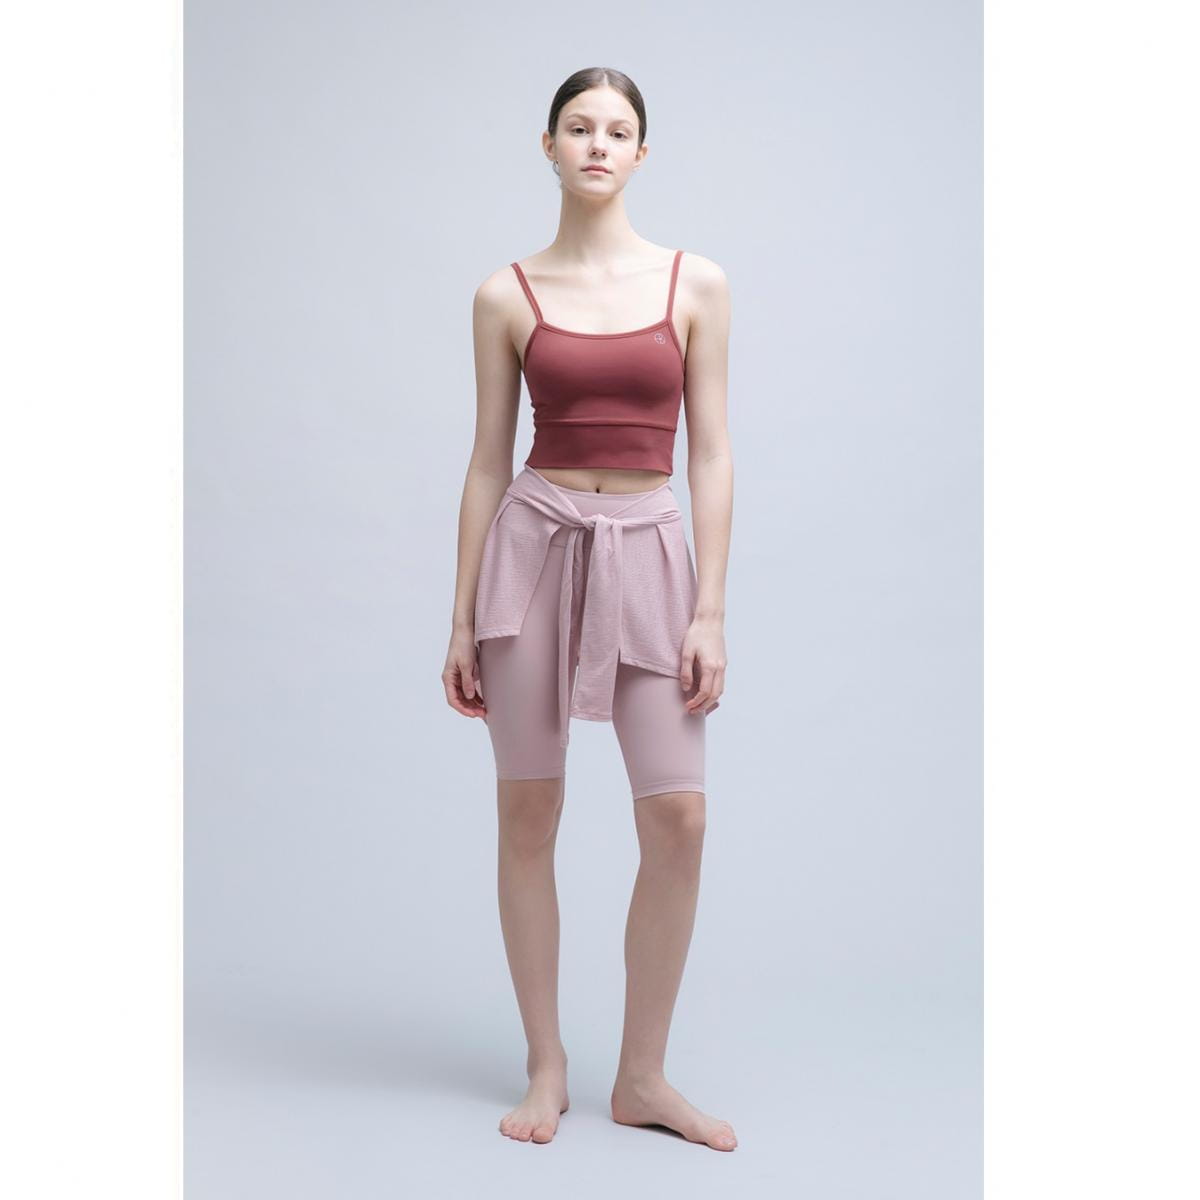 【BARREL】FIT LEGGINGS COVER UP 美臀罩衫 #DUSTY PINK 1